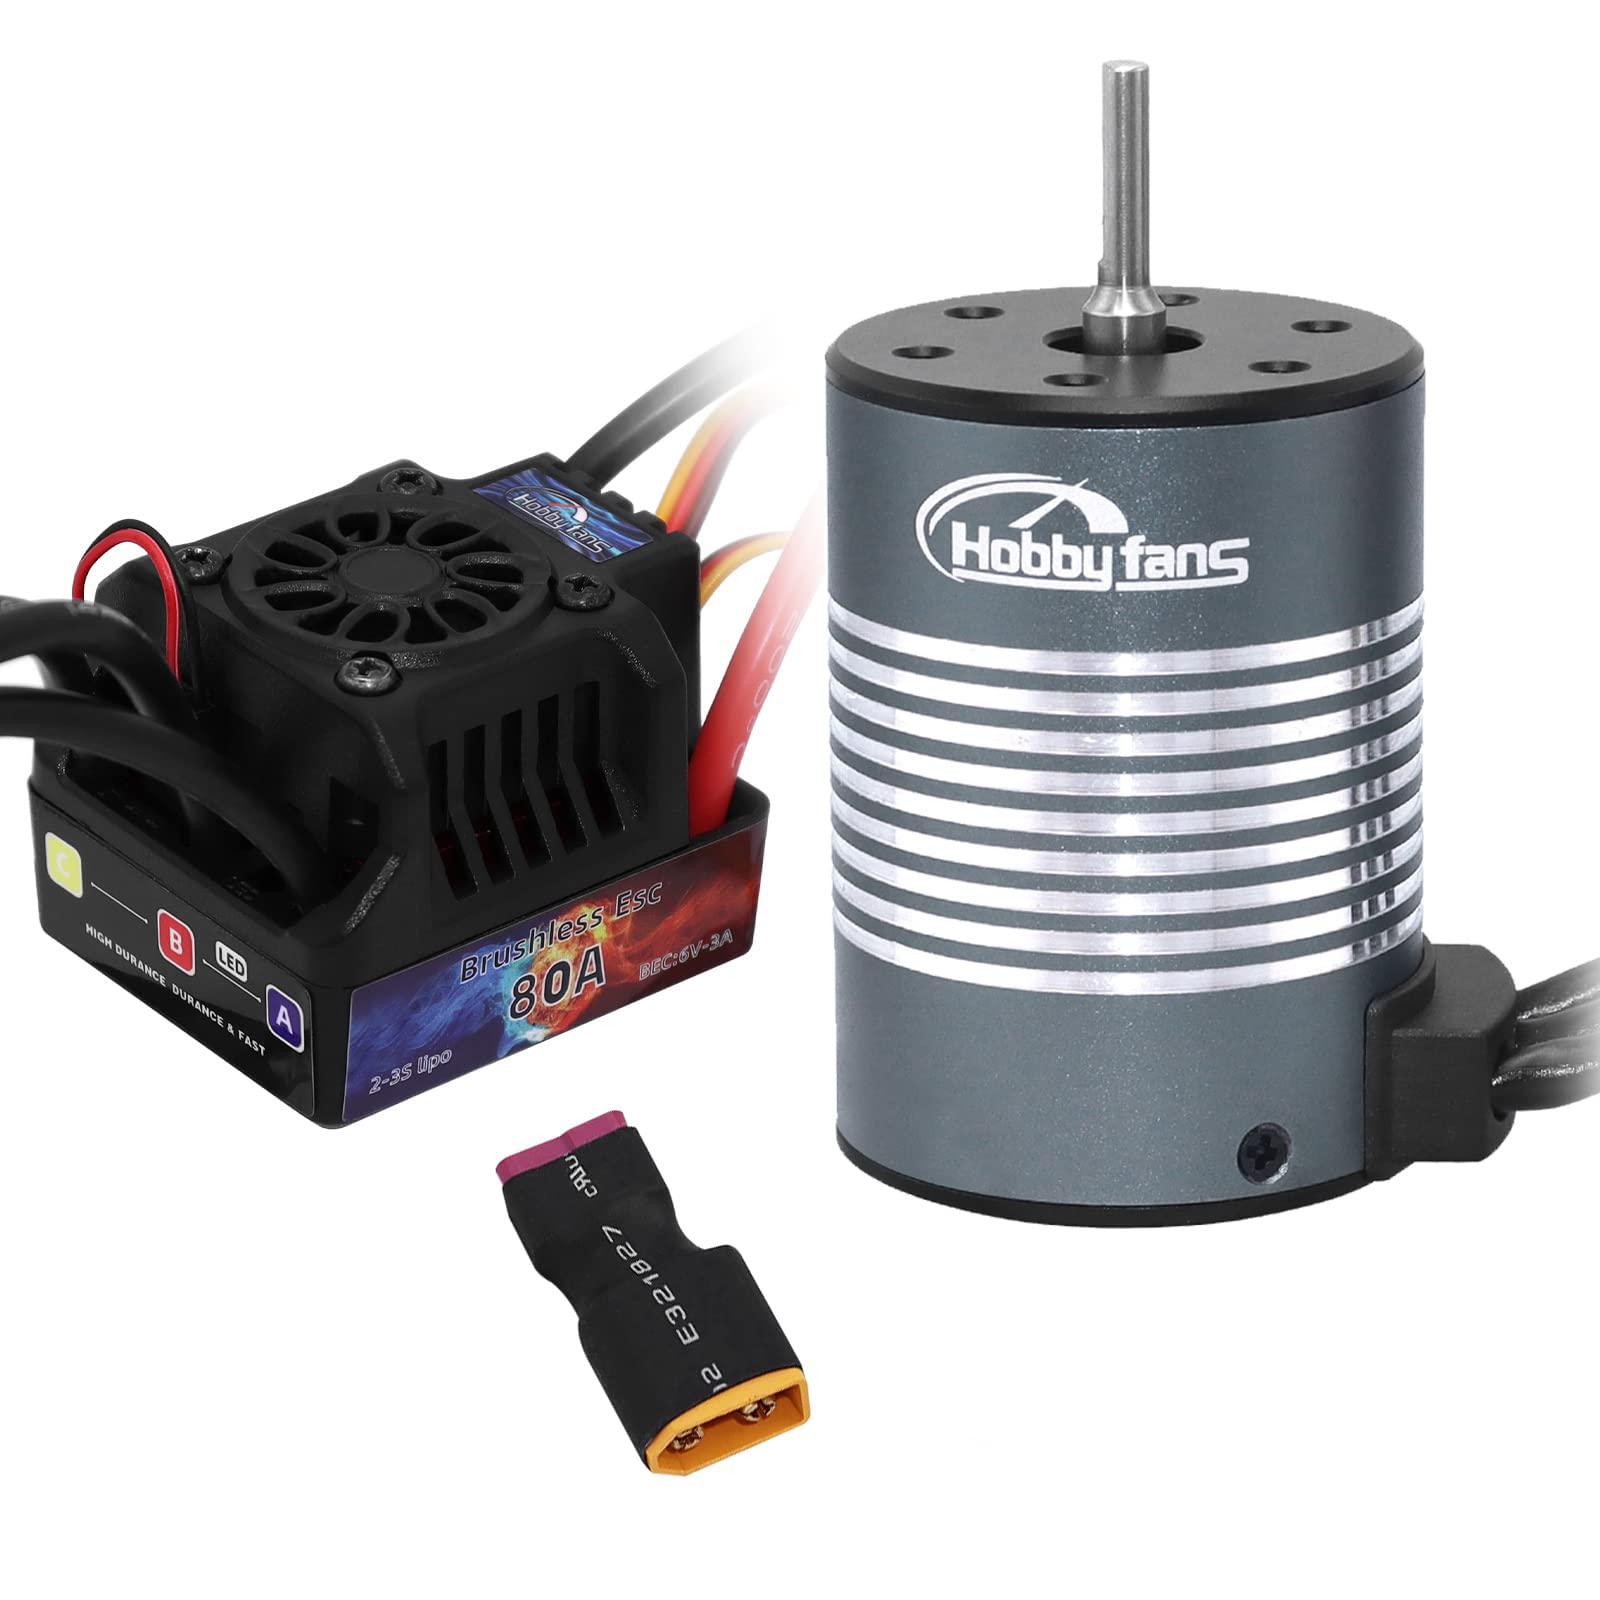 Fastest Brushless Rc Motor 1/10: Maximizing Speed: Factors to Consider When Choosing a Brushless Motor